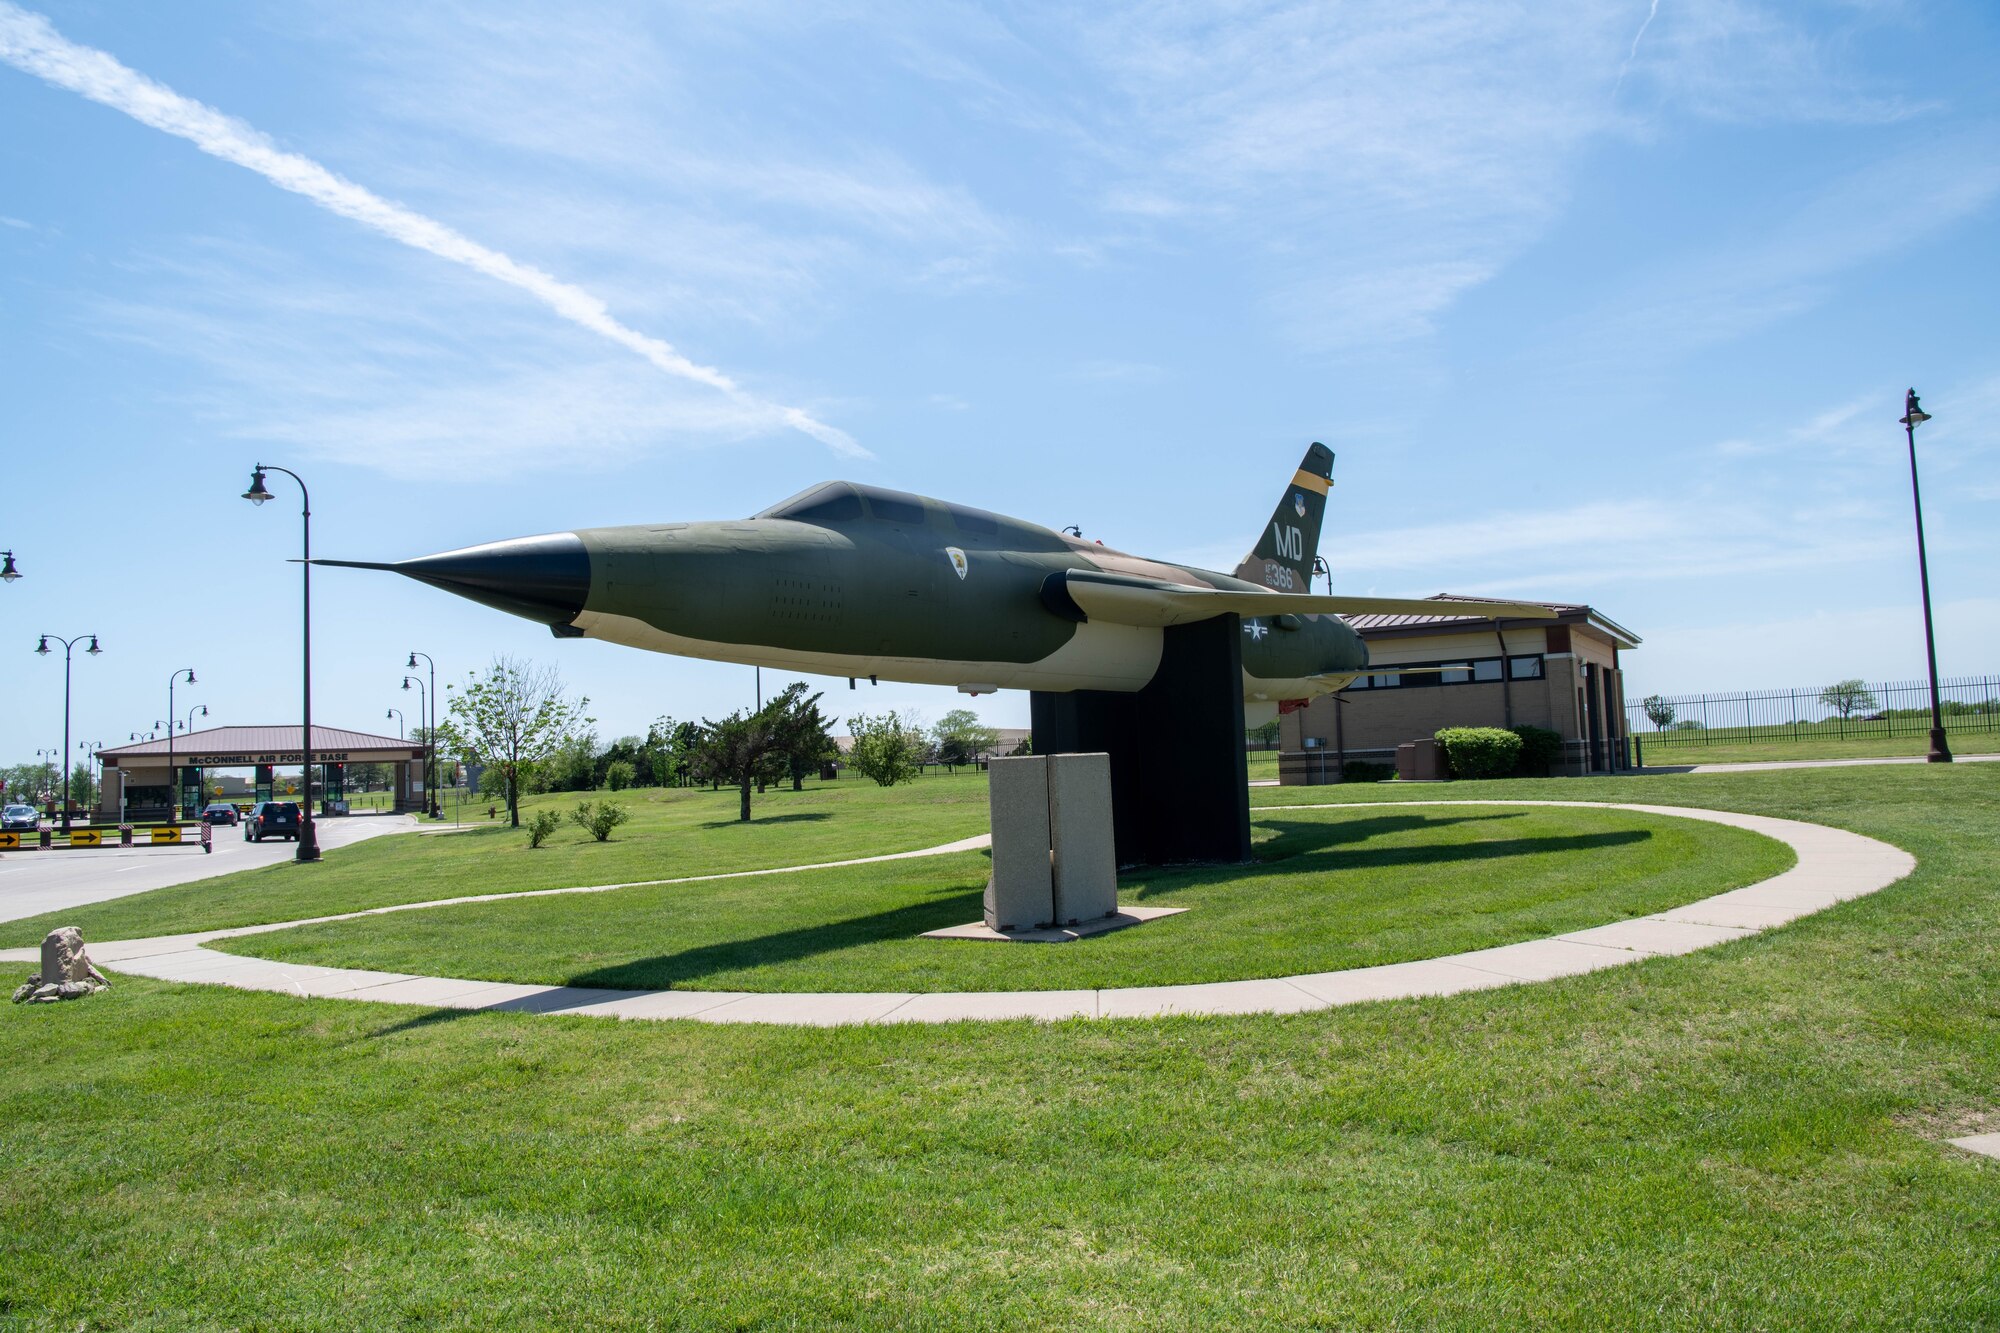 An F-105 Thundercheif is displayed outside McConnell Air Force Base, Kansas, honors those who flew the aircraft and its years of service.